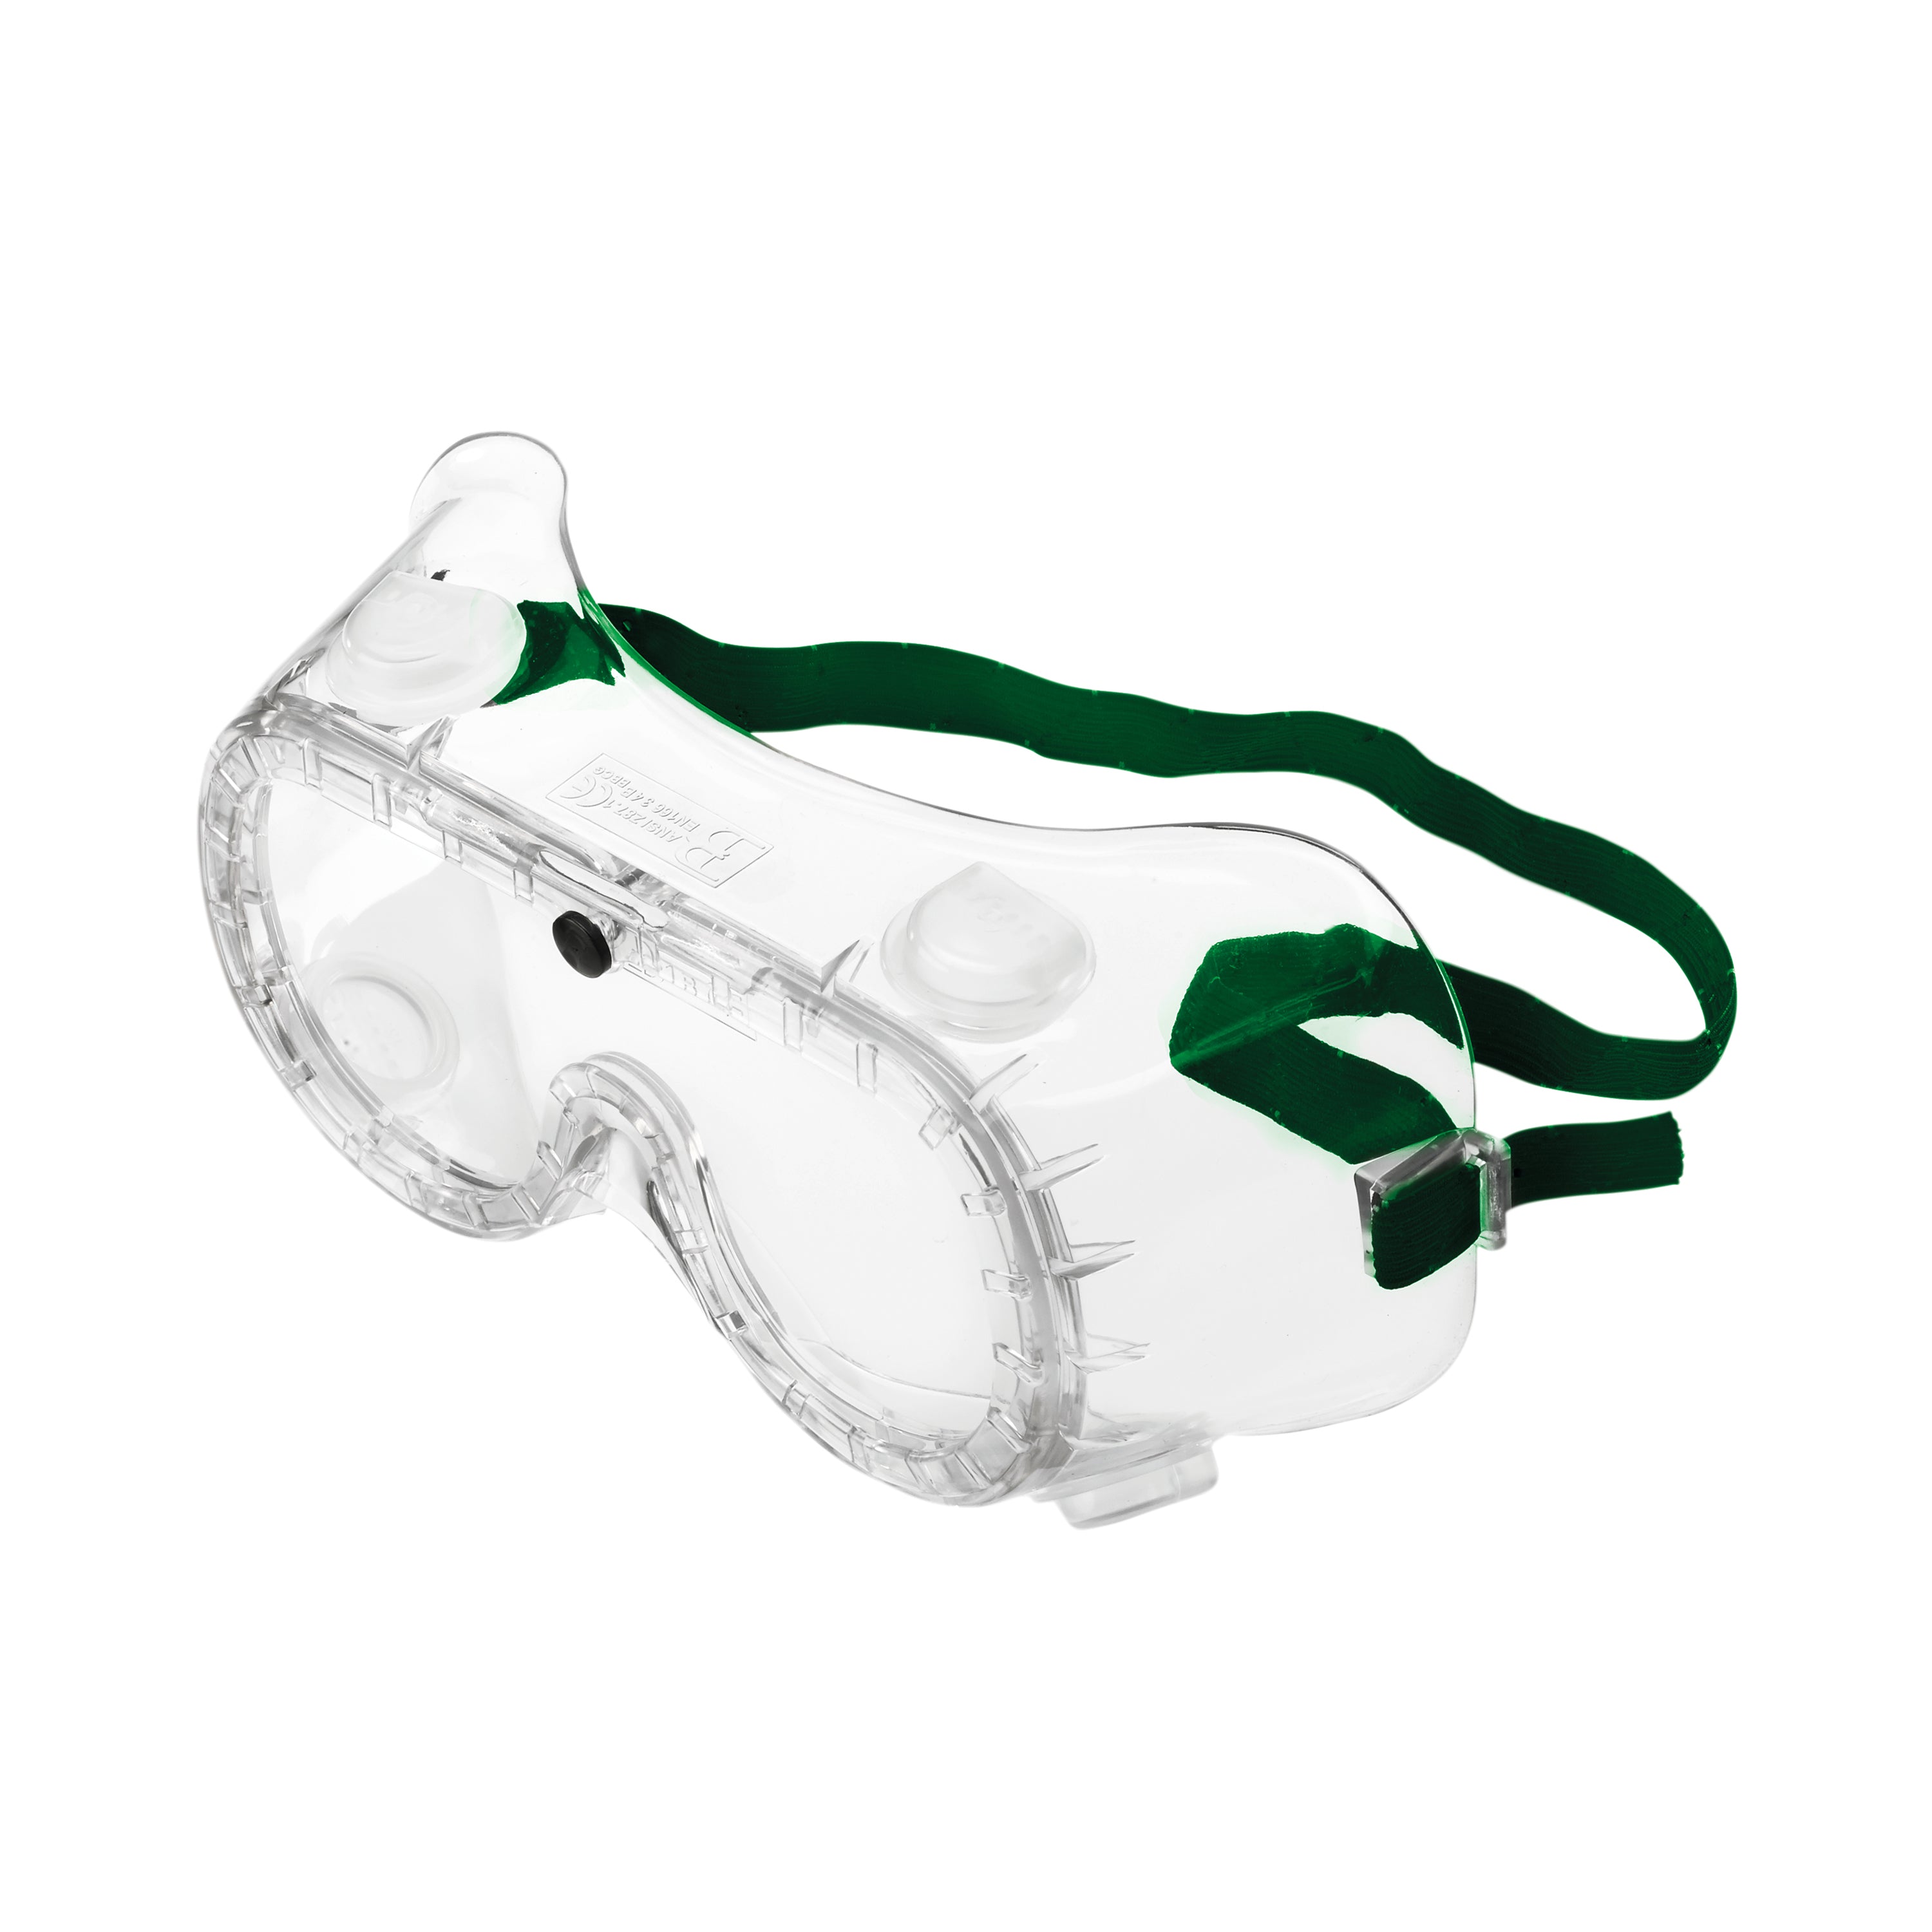 B-Brand SG-604 Safety Goggle Polycarbonate Clear BBSG604